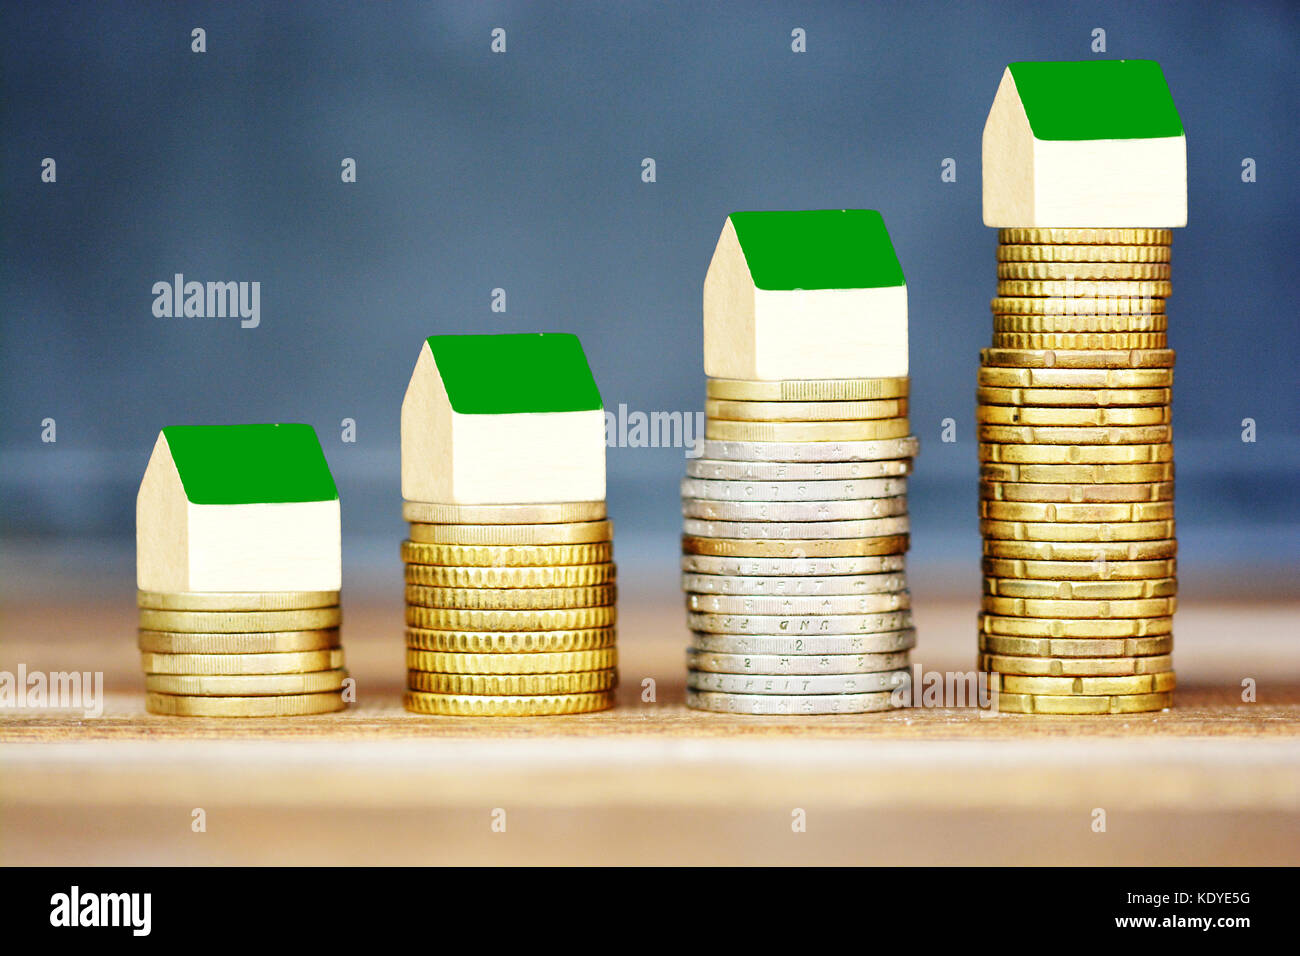 Real estate price evolution concept with miniature wooden houses on ascending piles of money Stock Photo